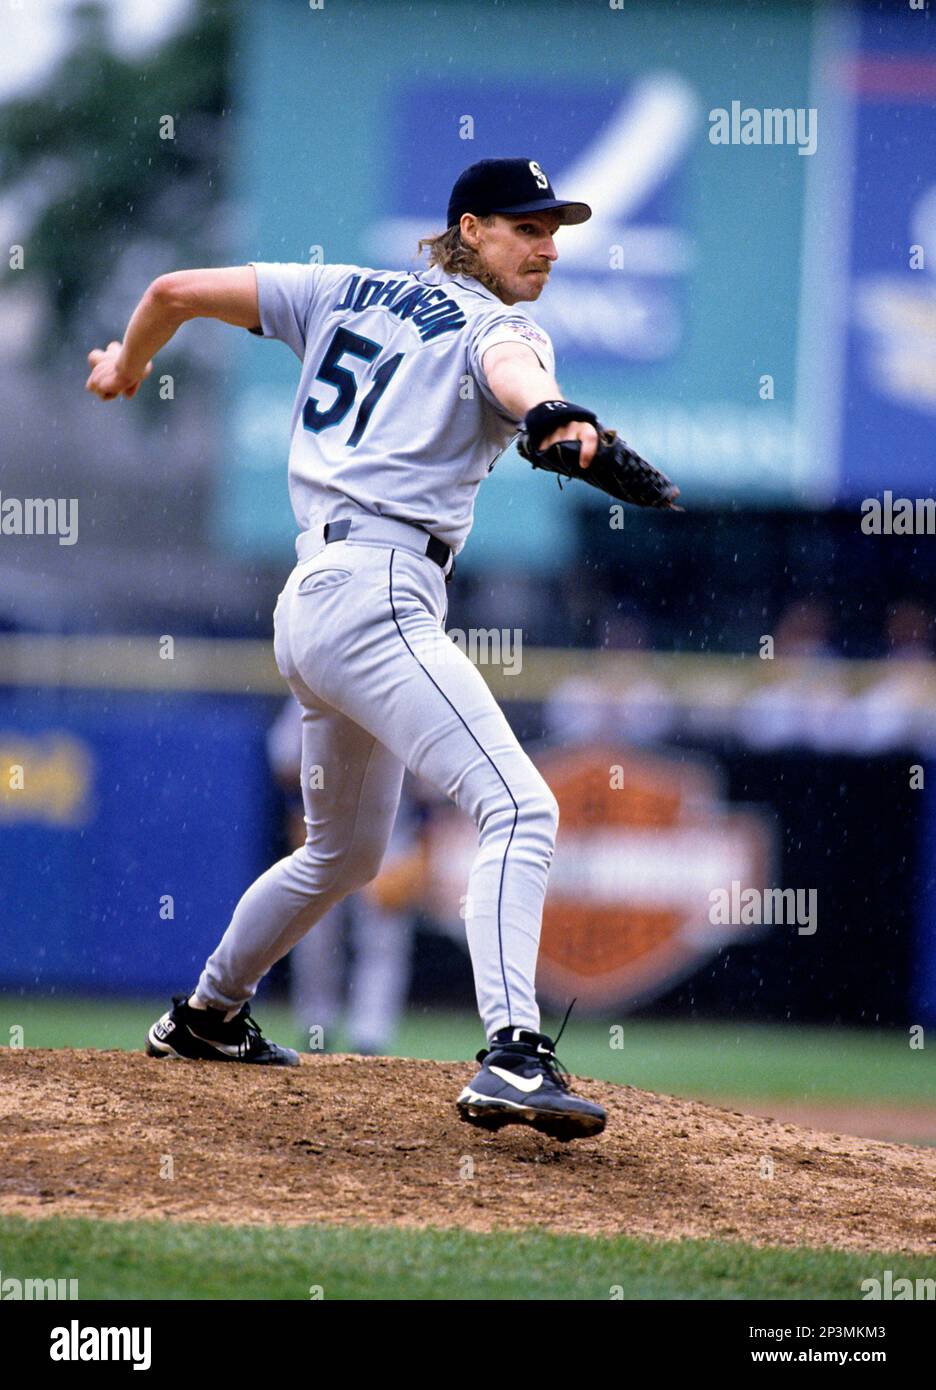 Seattle Mariners pitcher Randy Johnson plays in a game against the